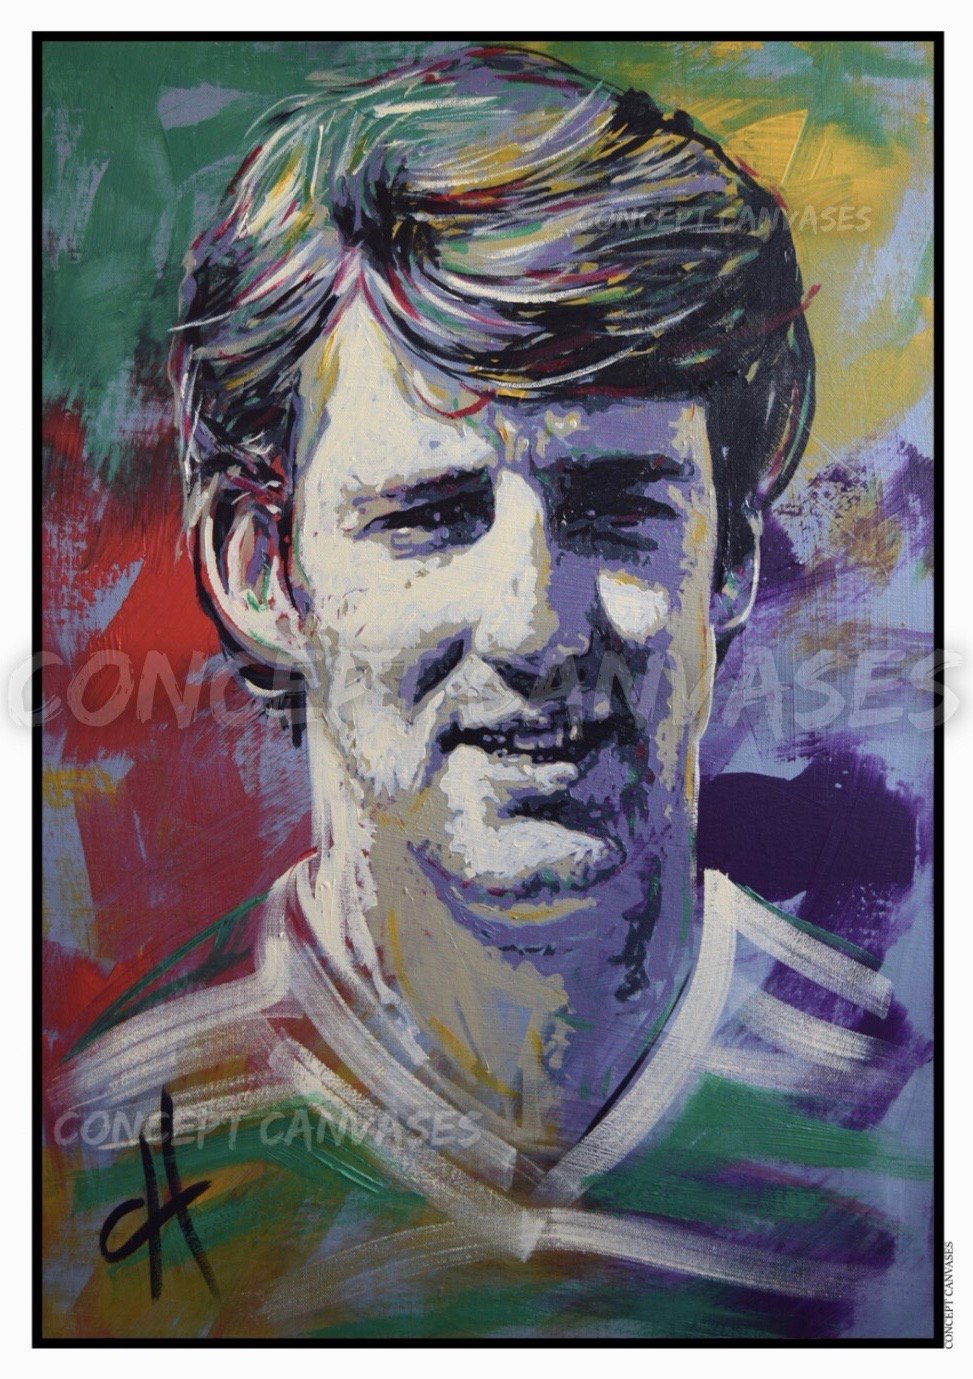 Image of Tommy Burns ‘More Than A Player’ A3 Print 